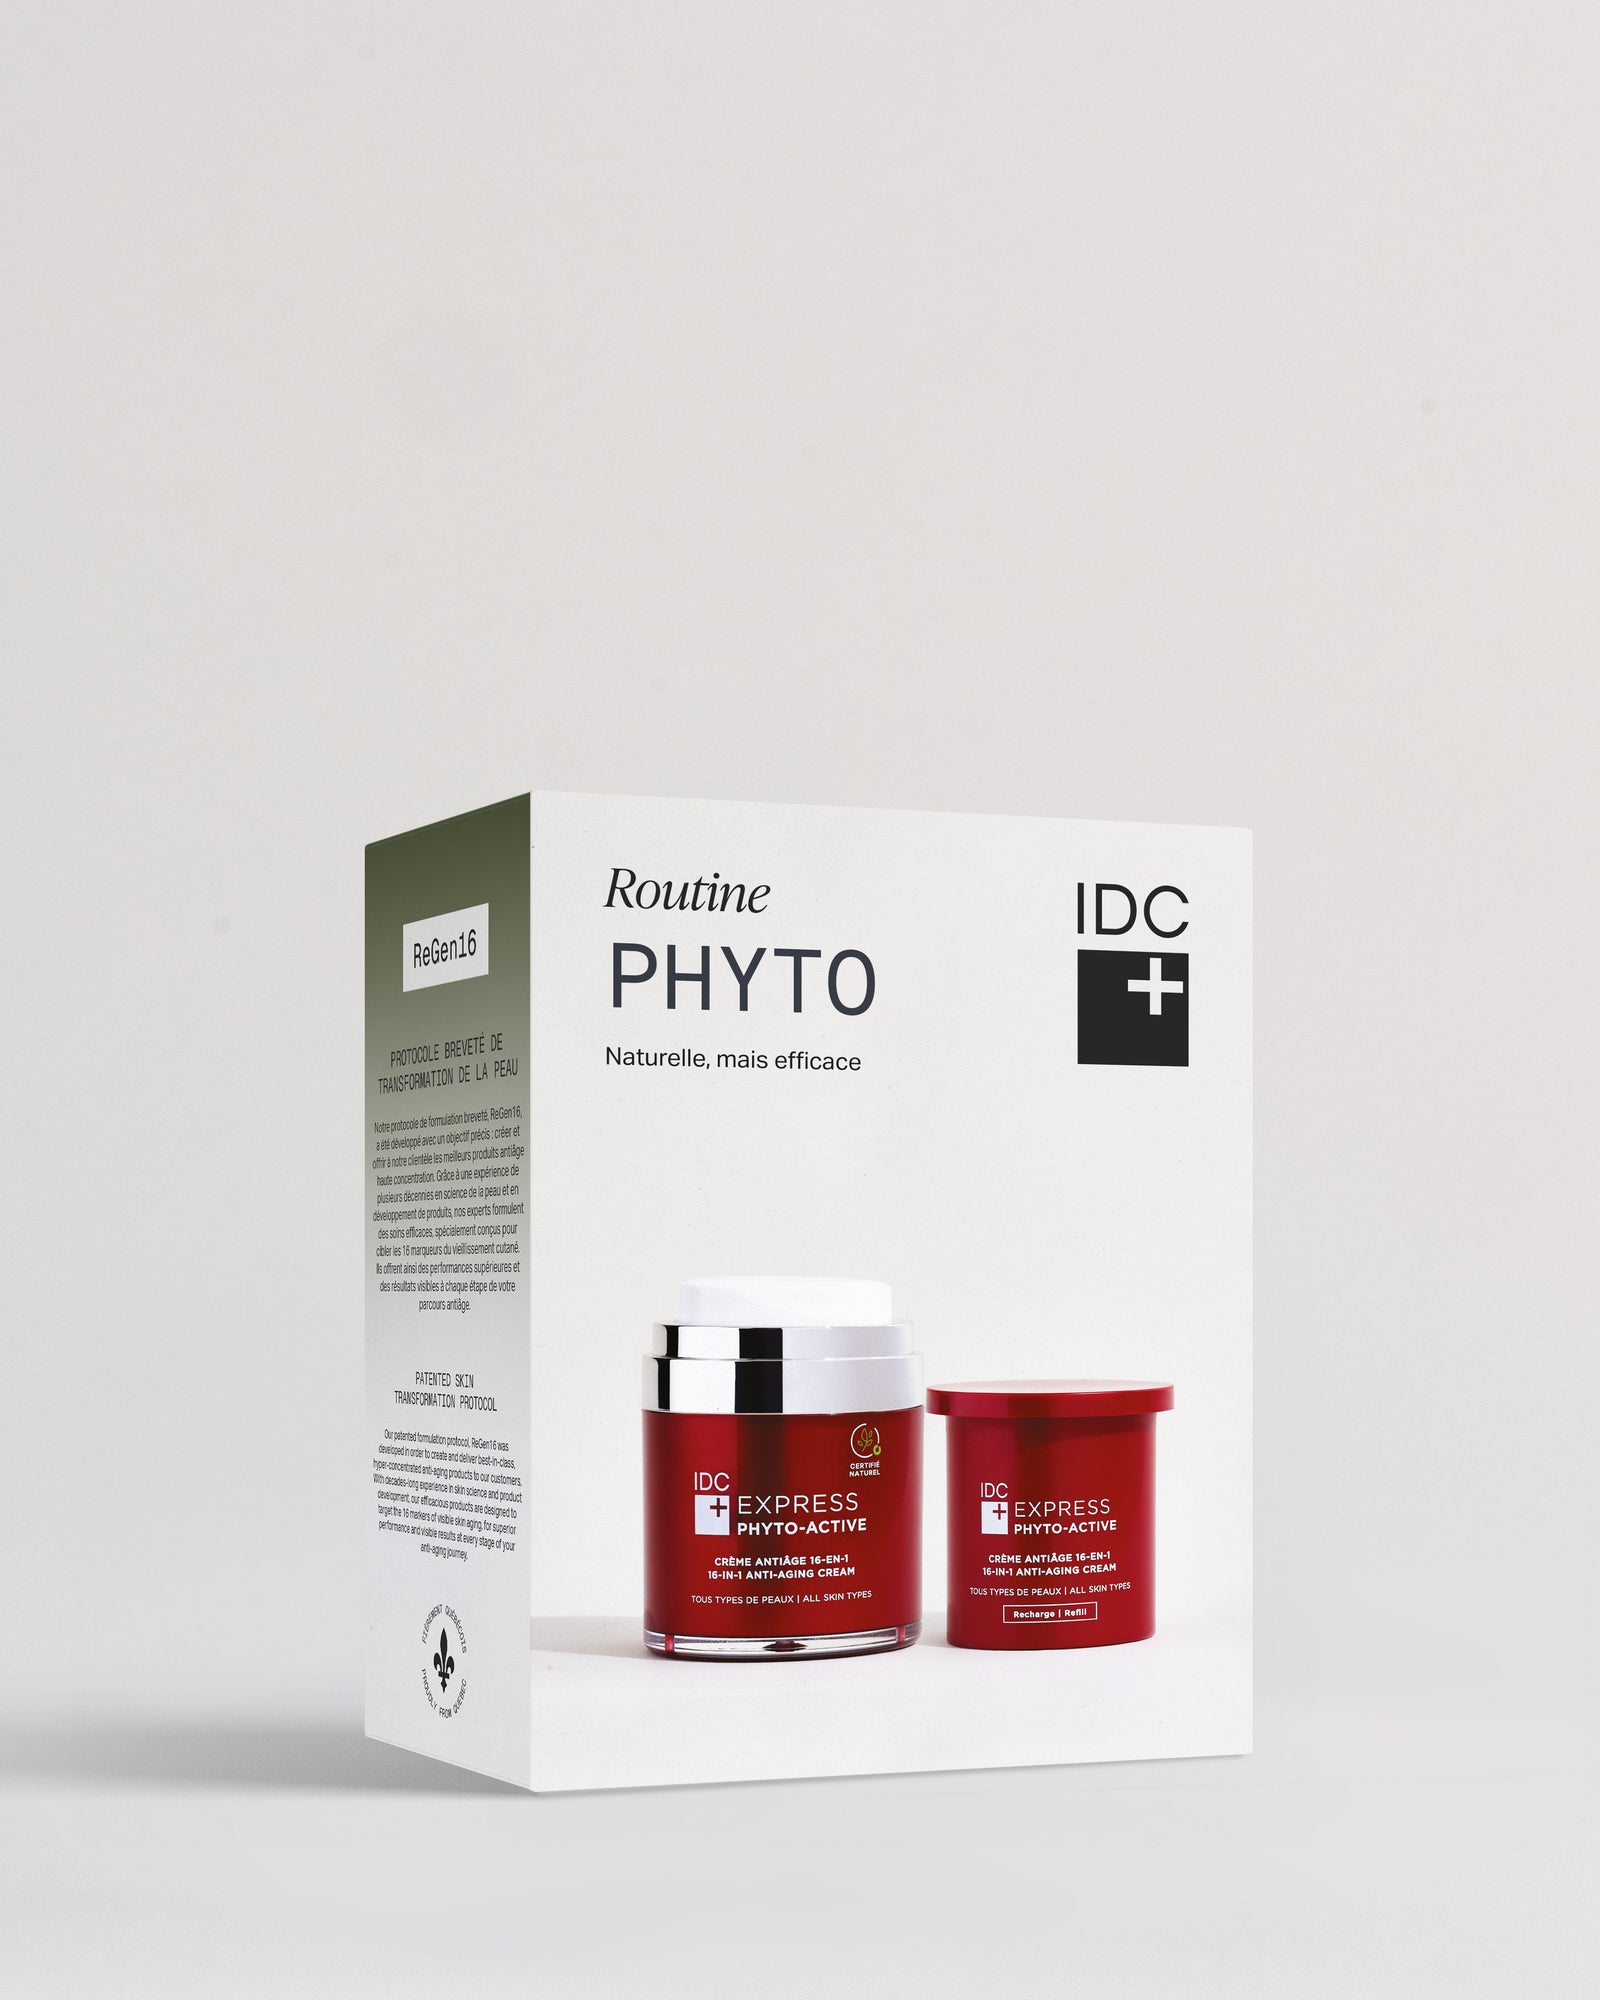 EXPRESS Phyto-Active Routine